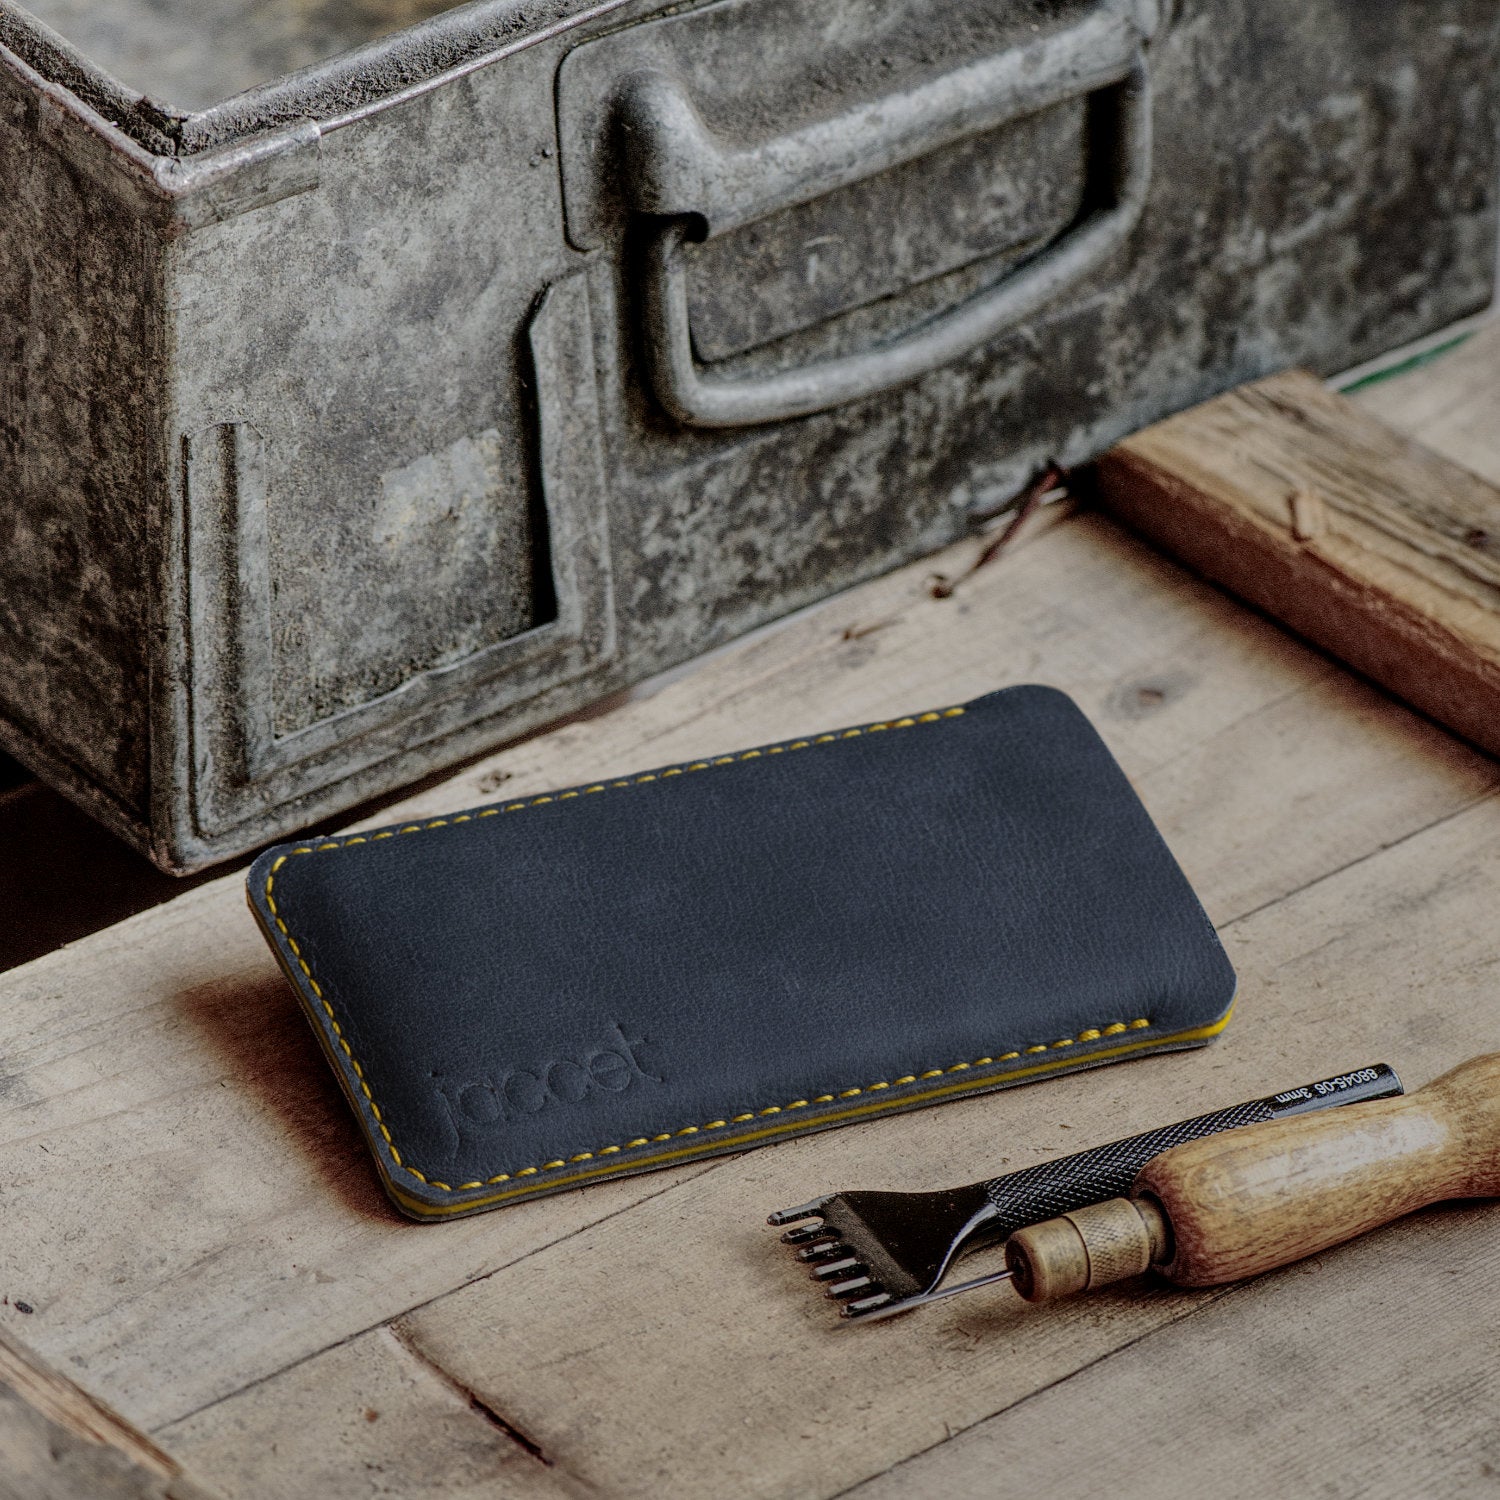 JACCET leather iPhone sleeve - anthracite/black leather with yellow wool felt. 100% Handmade